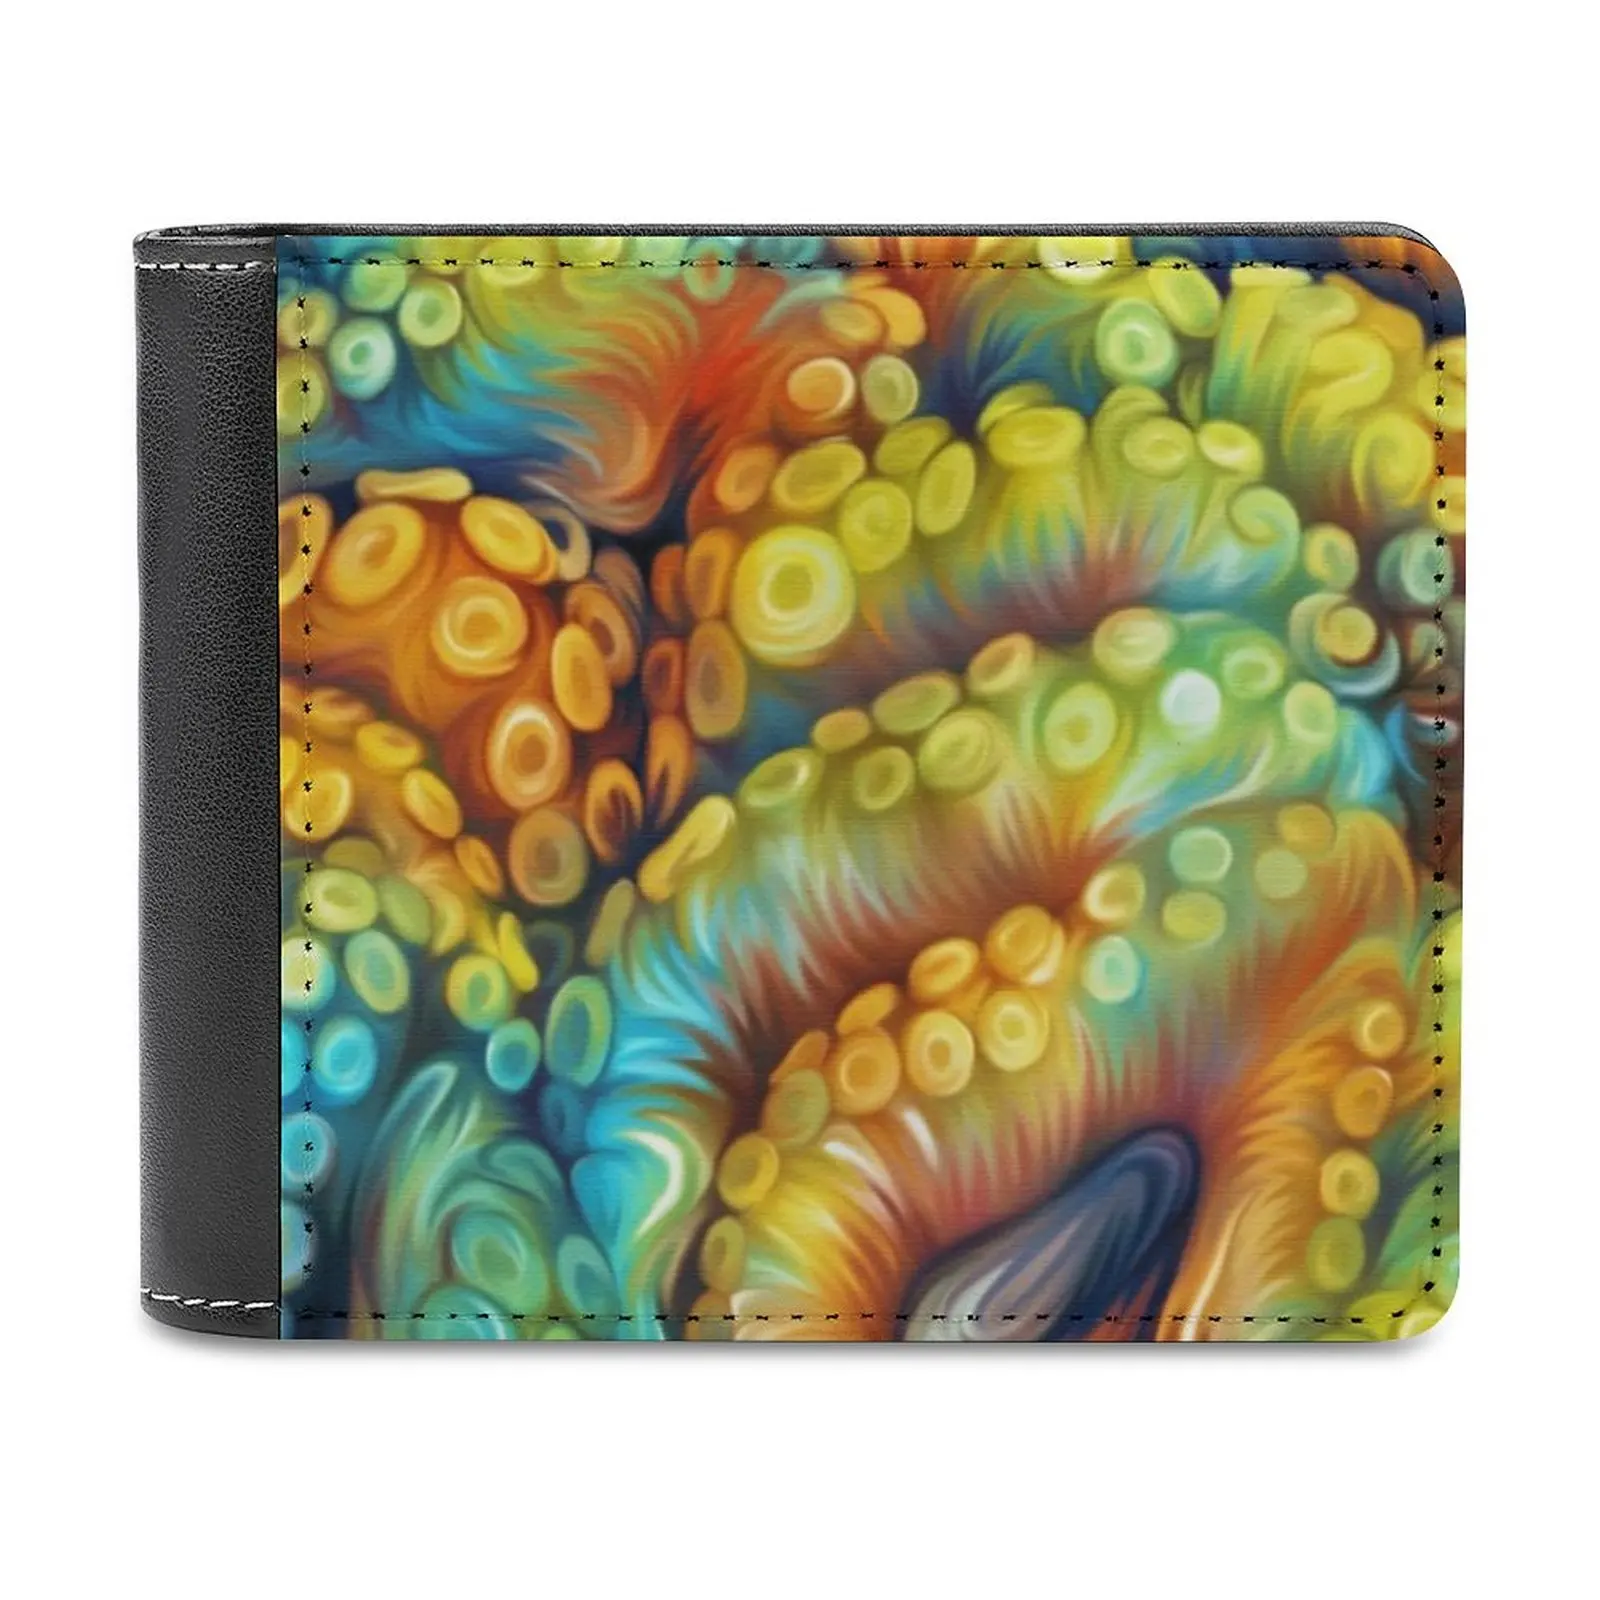 

Tentacles Soft Men Wallets New Purse Credit Card Holders For Male Purses Men Wallet Tentacles Tentacle Octopus Nature Squid